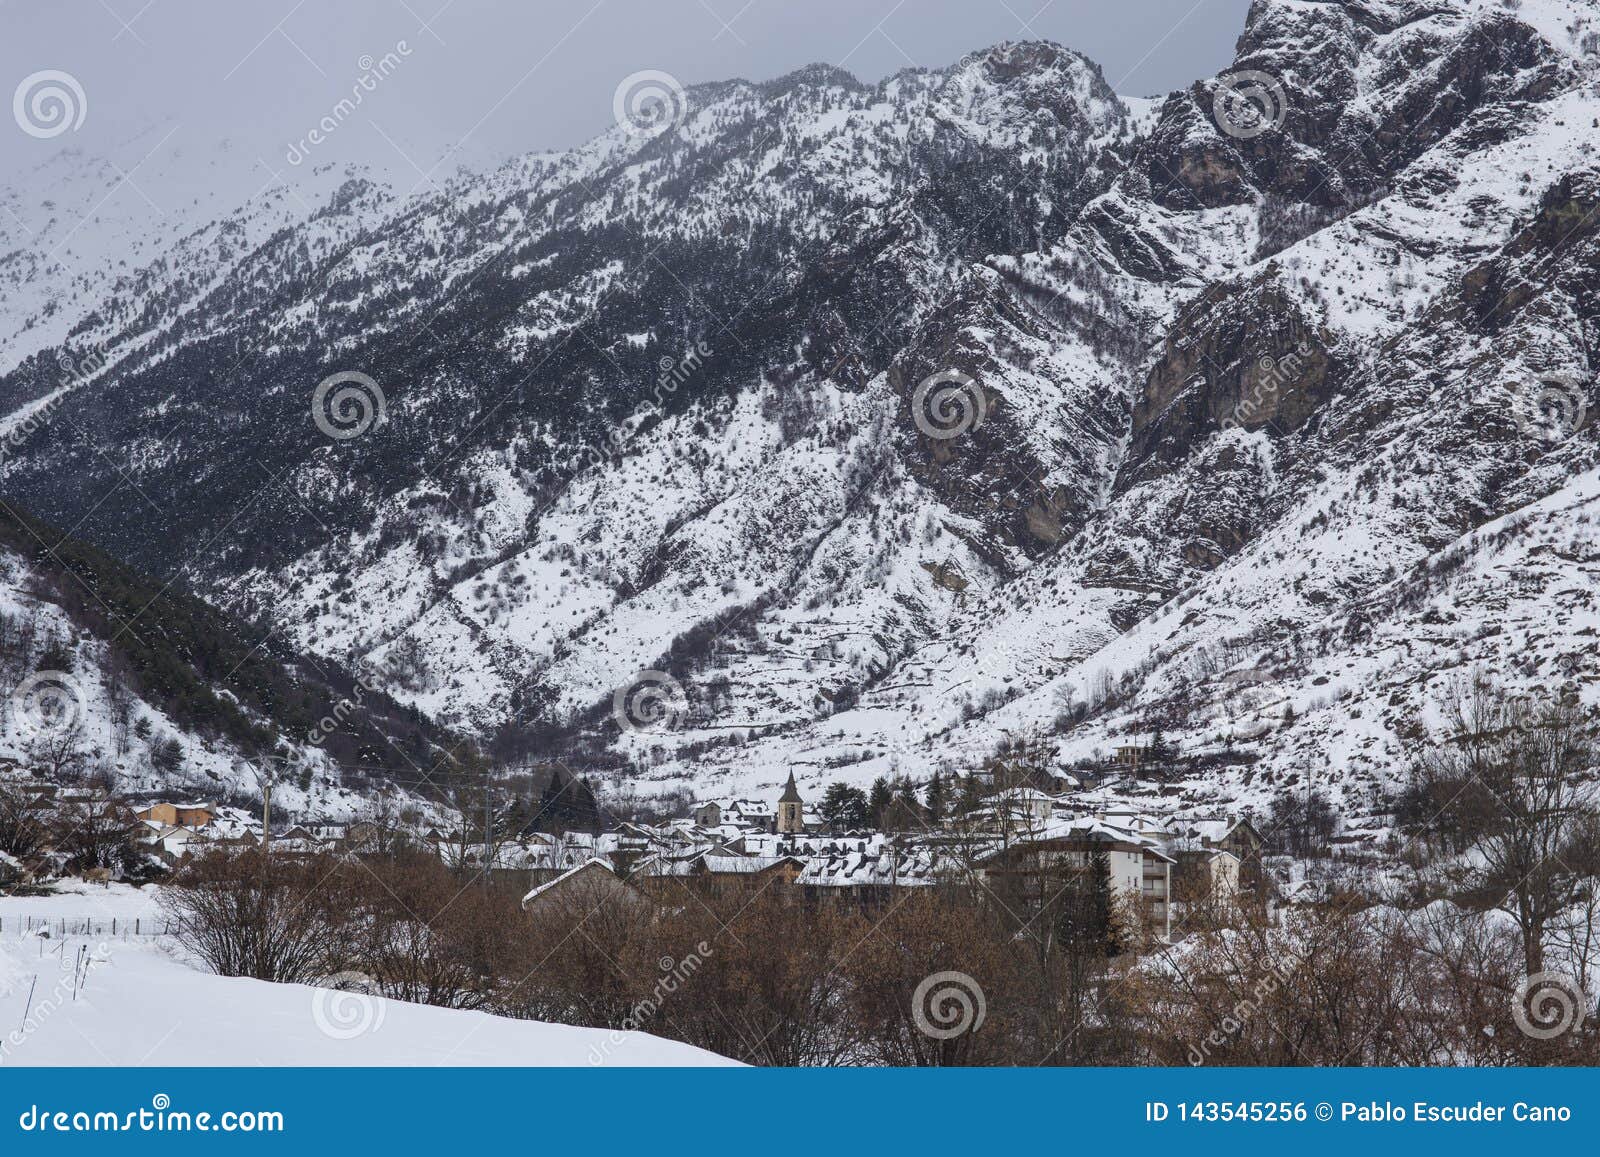 snowy town of espot in winter.